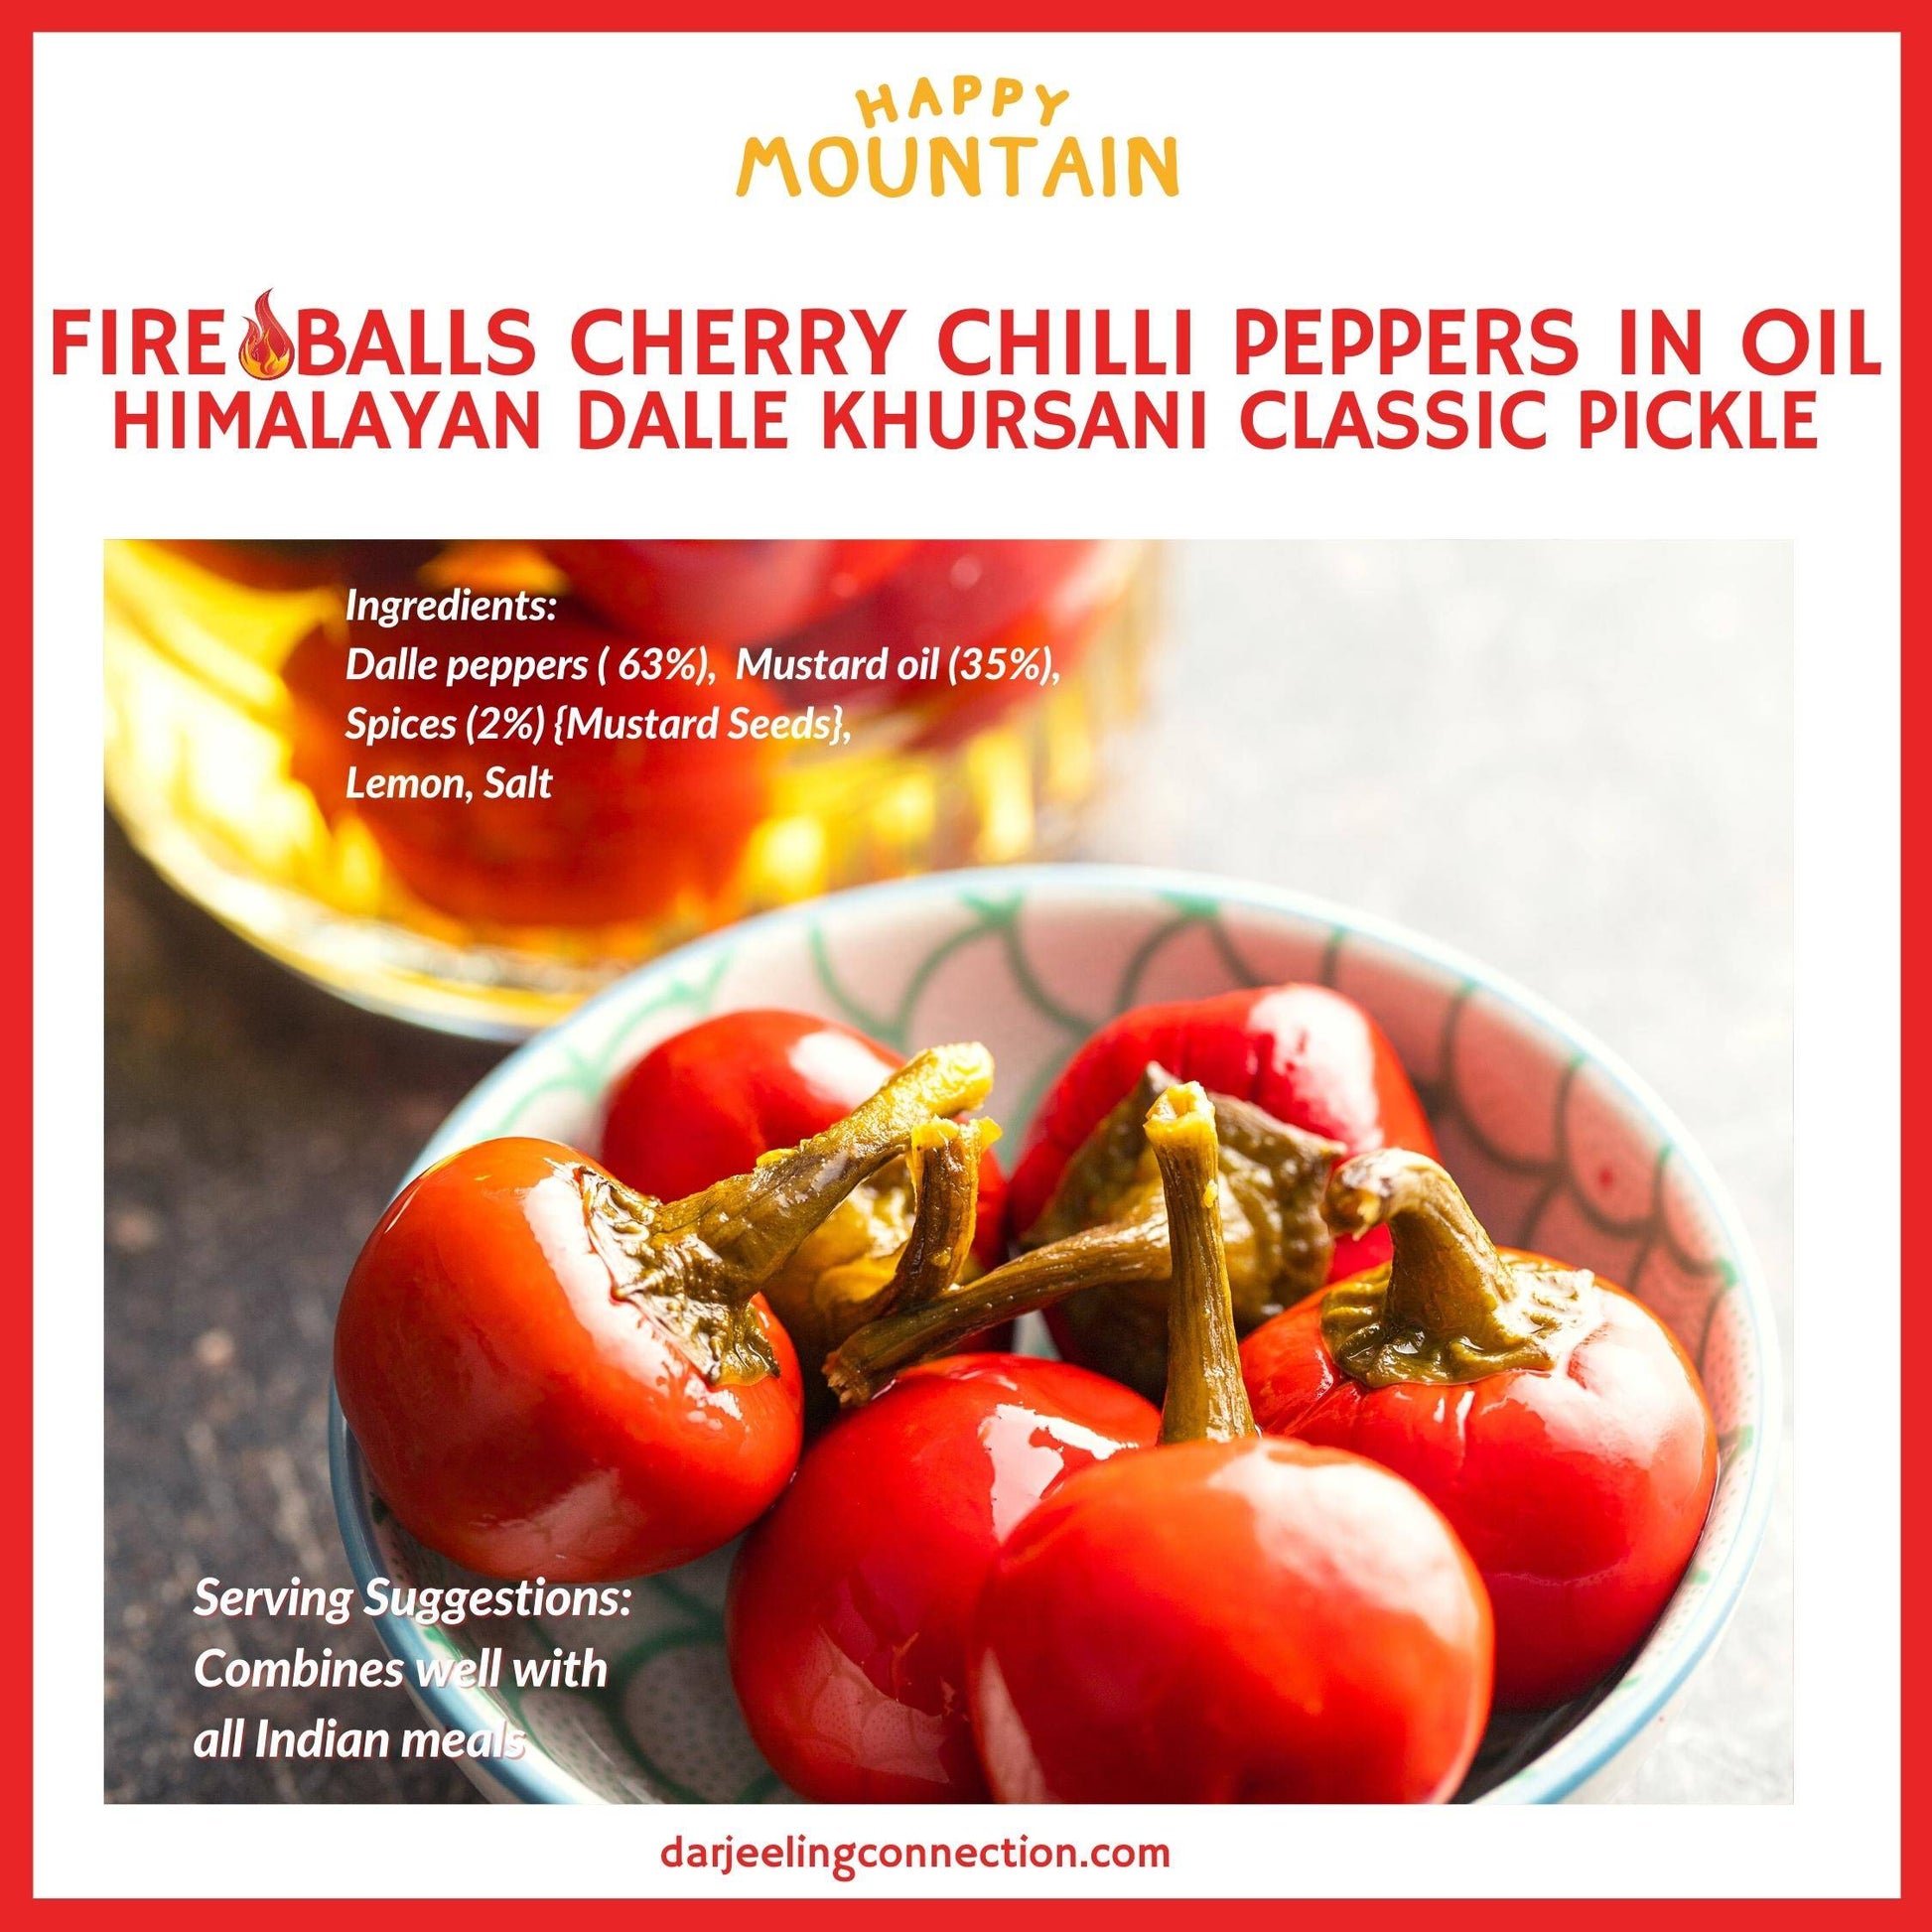 Ingredients Used in Fireballs - Cherry Chilli Peppers (Dalle) in Oil - Happy Mountain